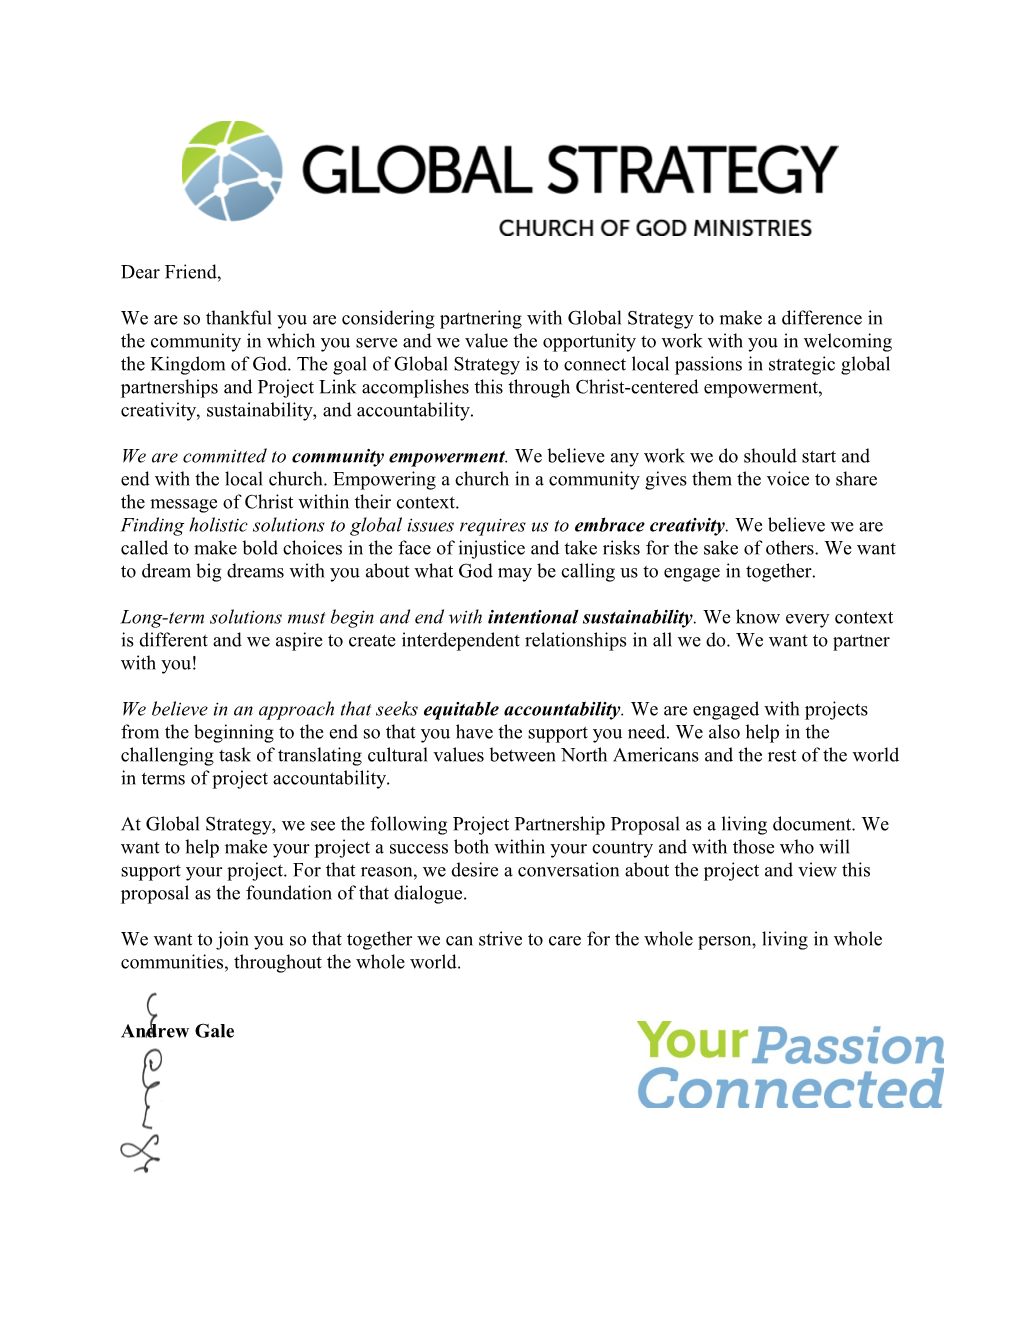 We Are So Thankful You Are Considering Partnering with Global Strategy to Make a Difference